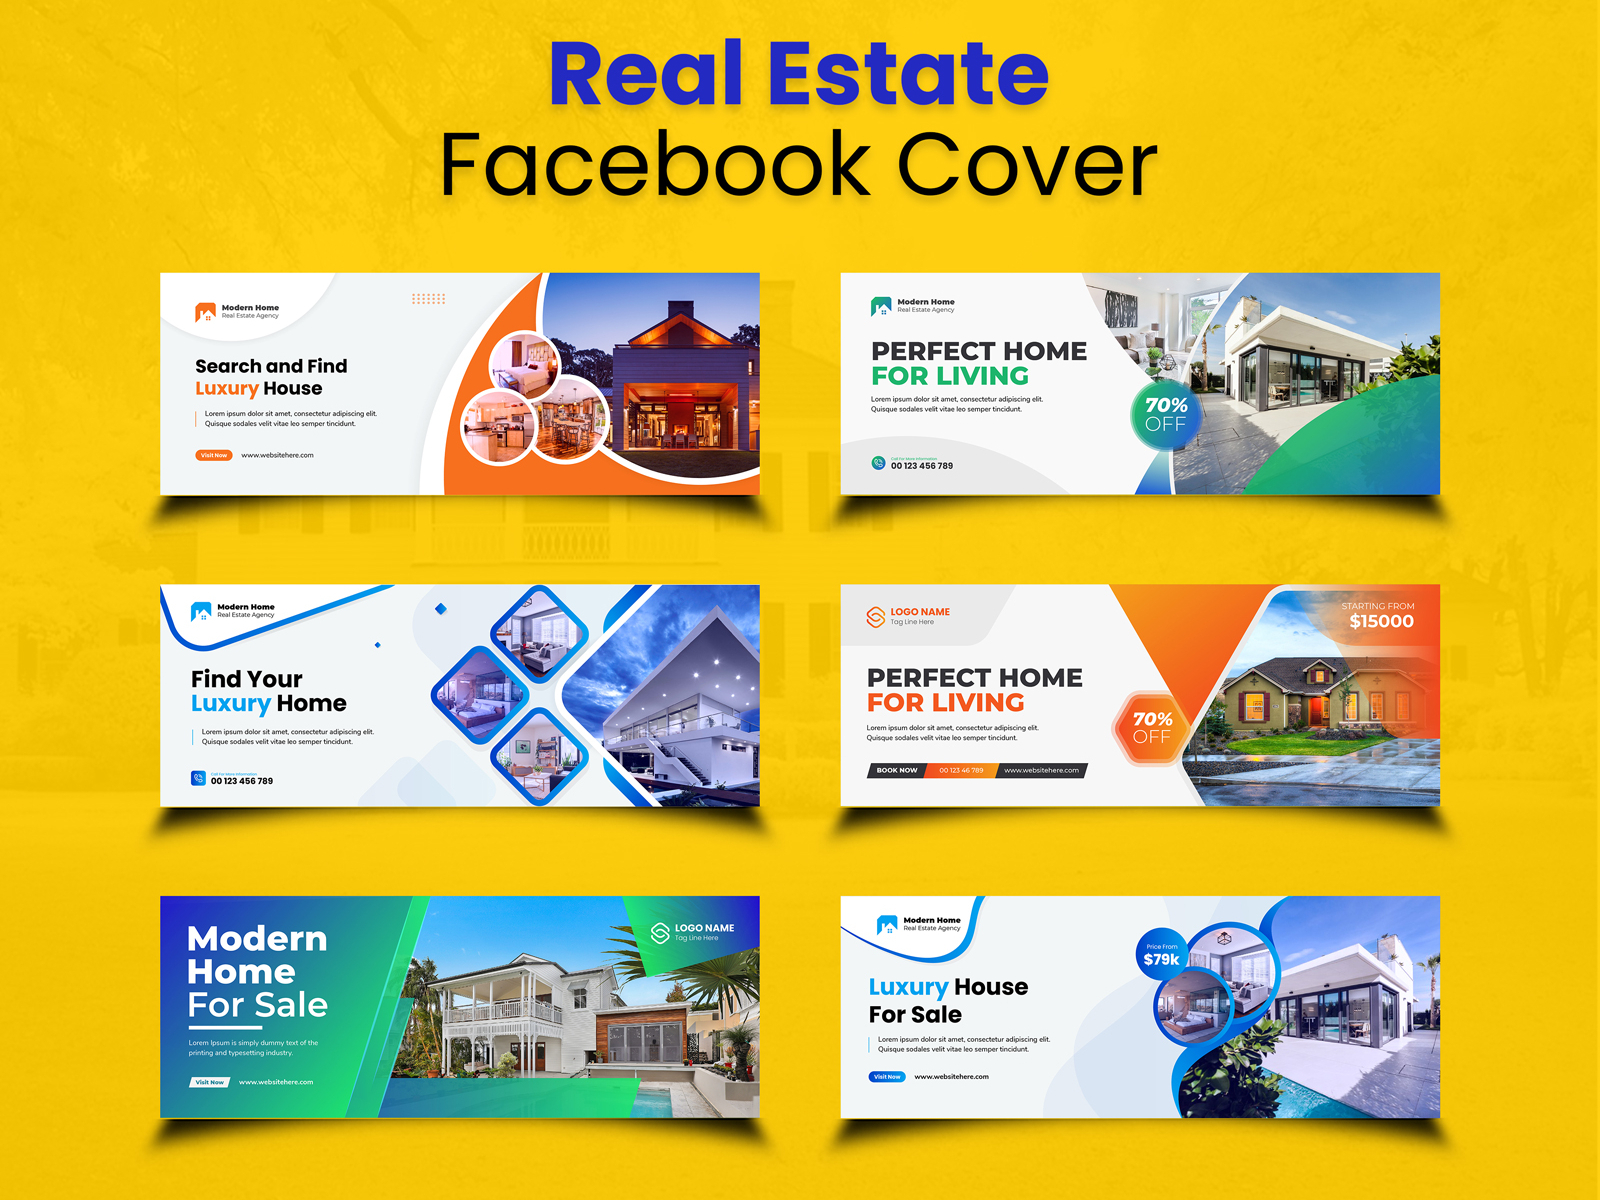 Real estate facebook cover and web ad banners by Shahin Uddin on Dribbble